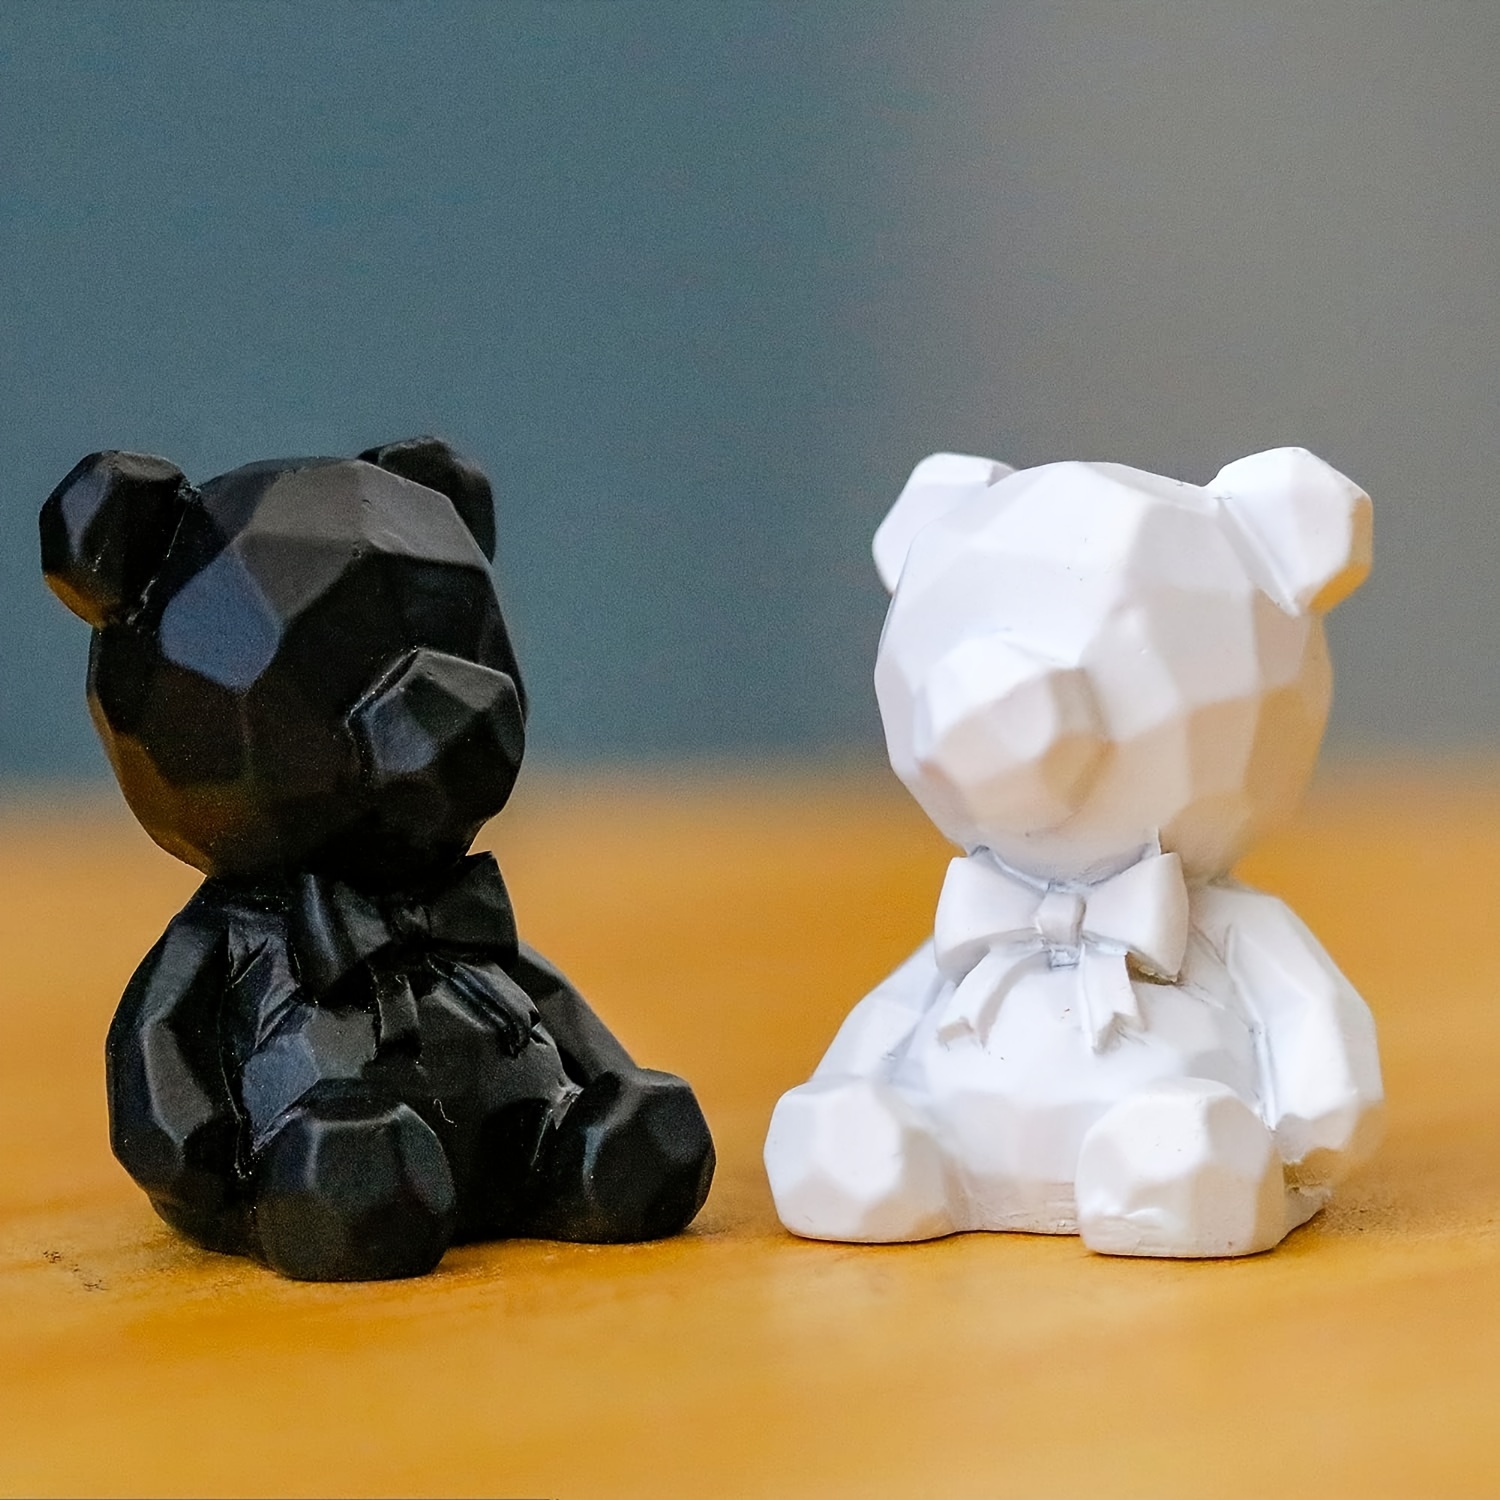 Bearbrick Silicone / Chocolate / Resin DIY Candle Mold 